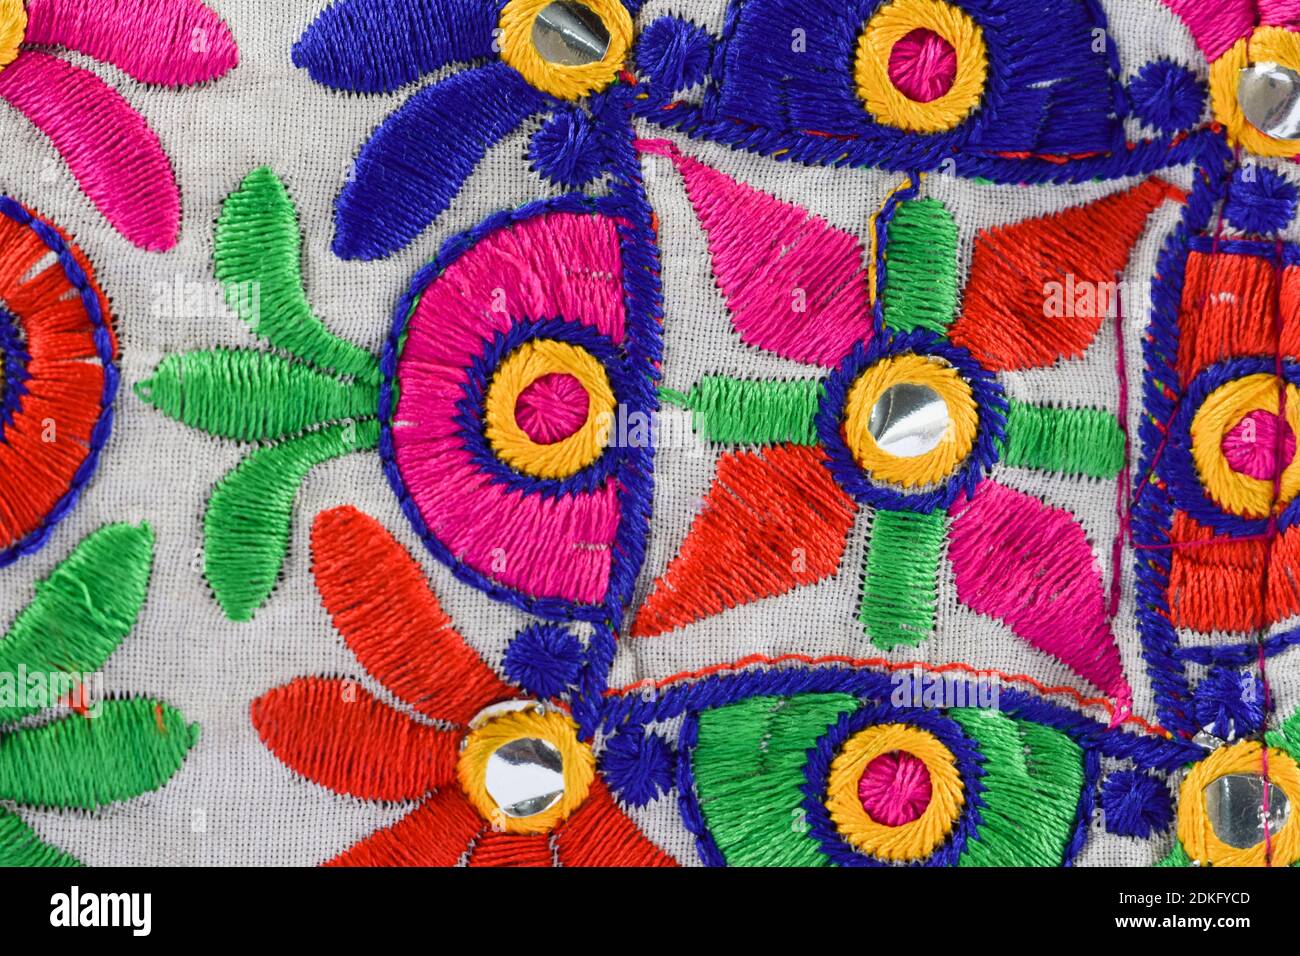 Colorful Kutchi embroidery on cloth woven weaving dont by artisans. Handmade thread works, mirror work from Gujarat, India Stock Photo